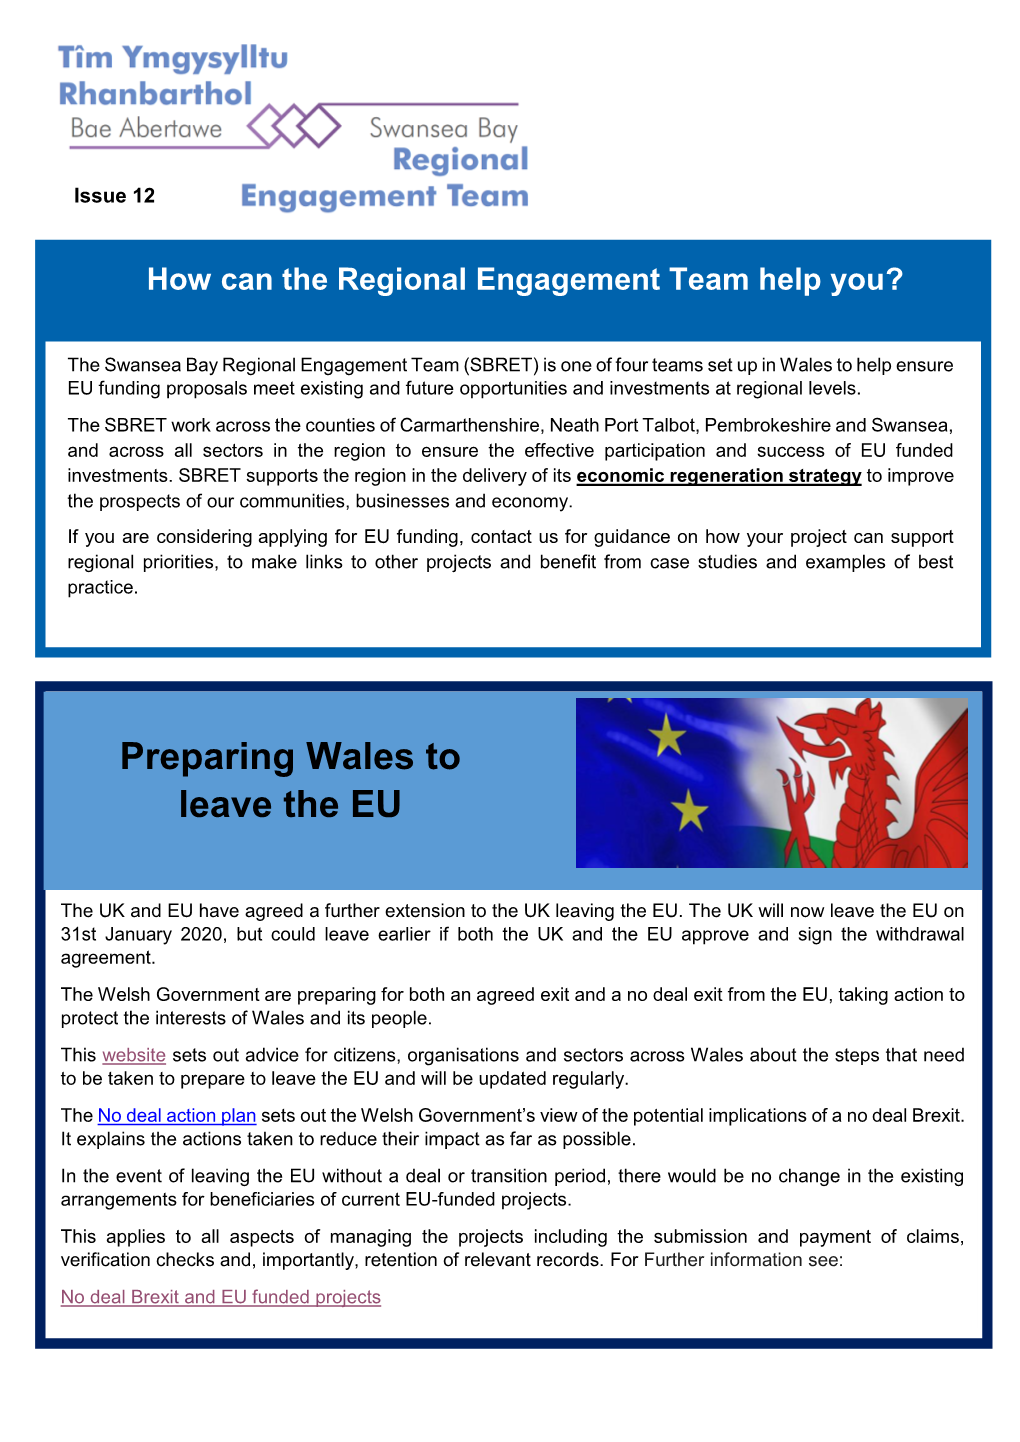 Preparing Wales to Leave the EU